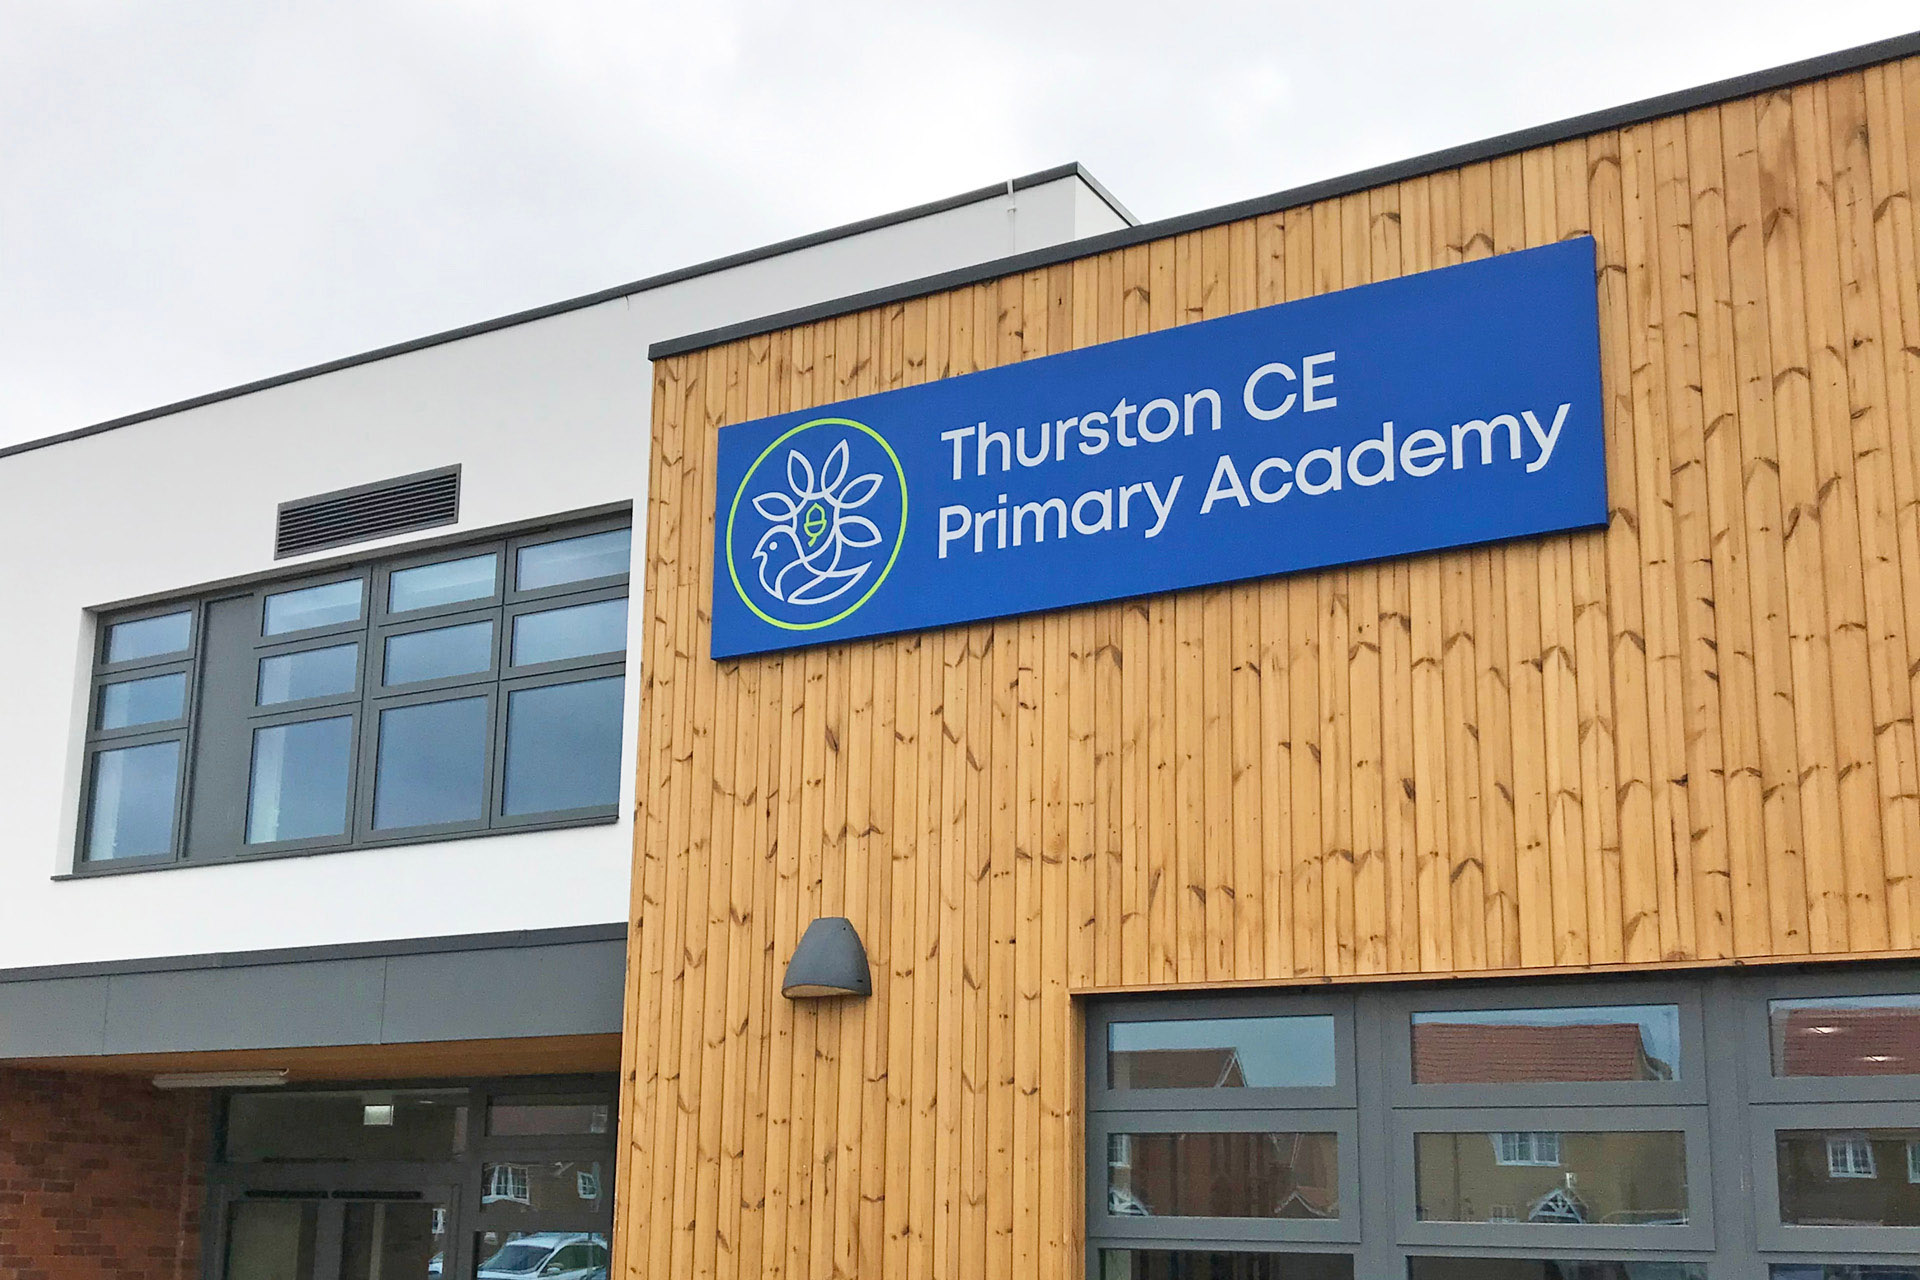 External dibond signage graphic design and printing for Thurston Primary Academy